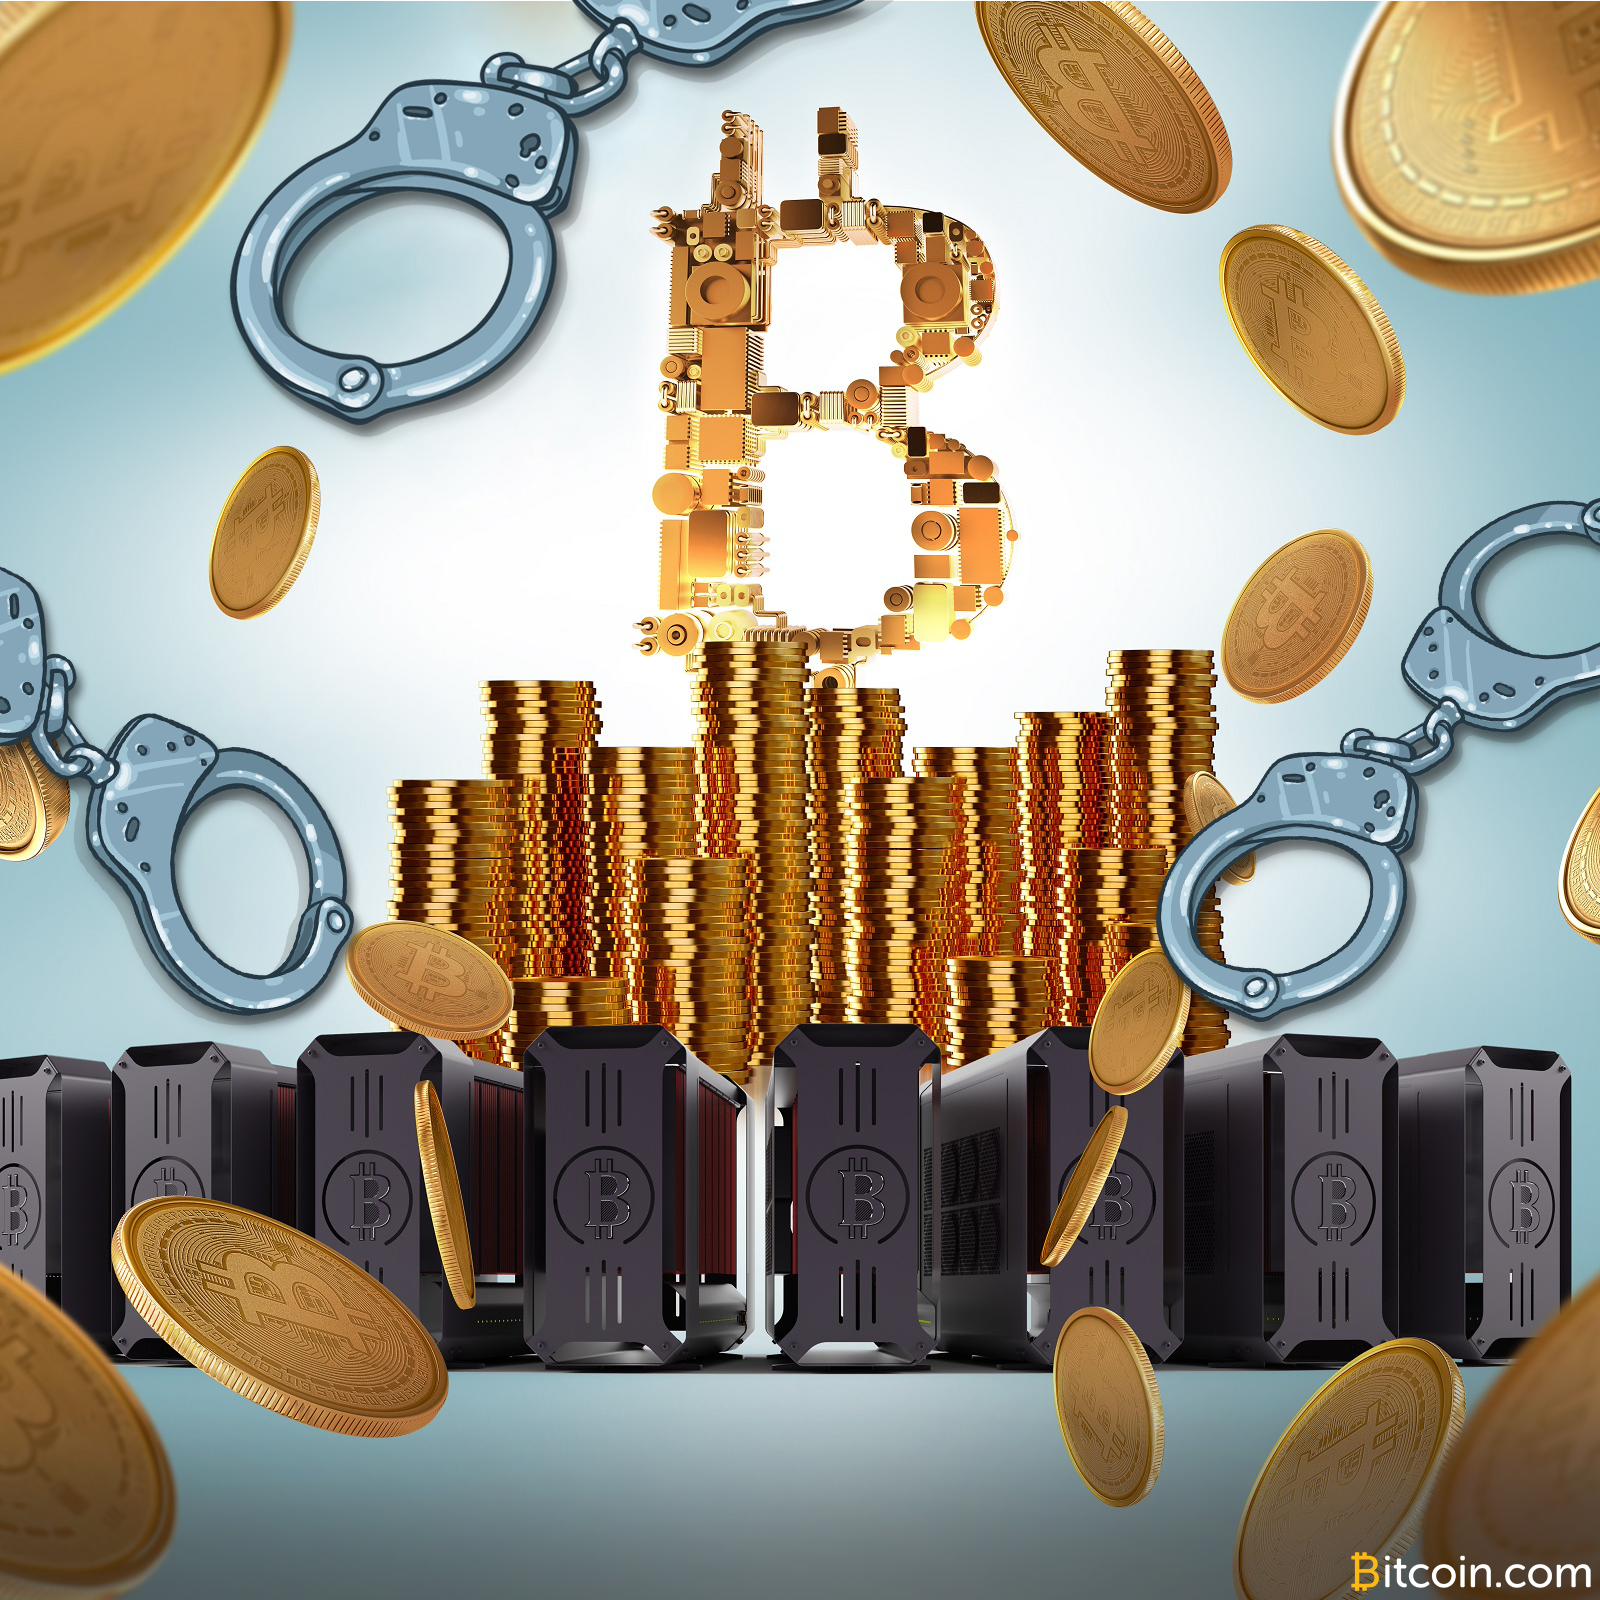 Arrests of Bitcoin Miners in Ukraine Spark Questions About Legality